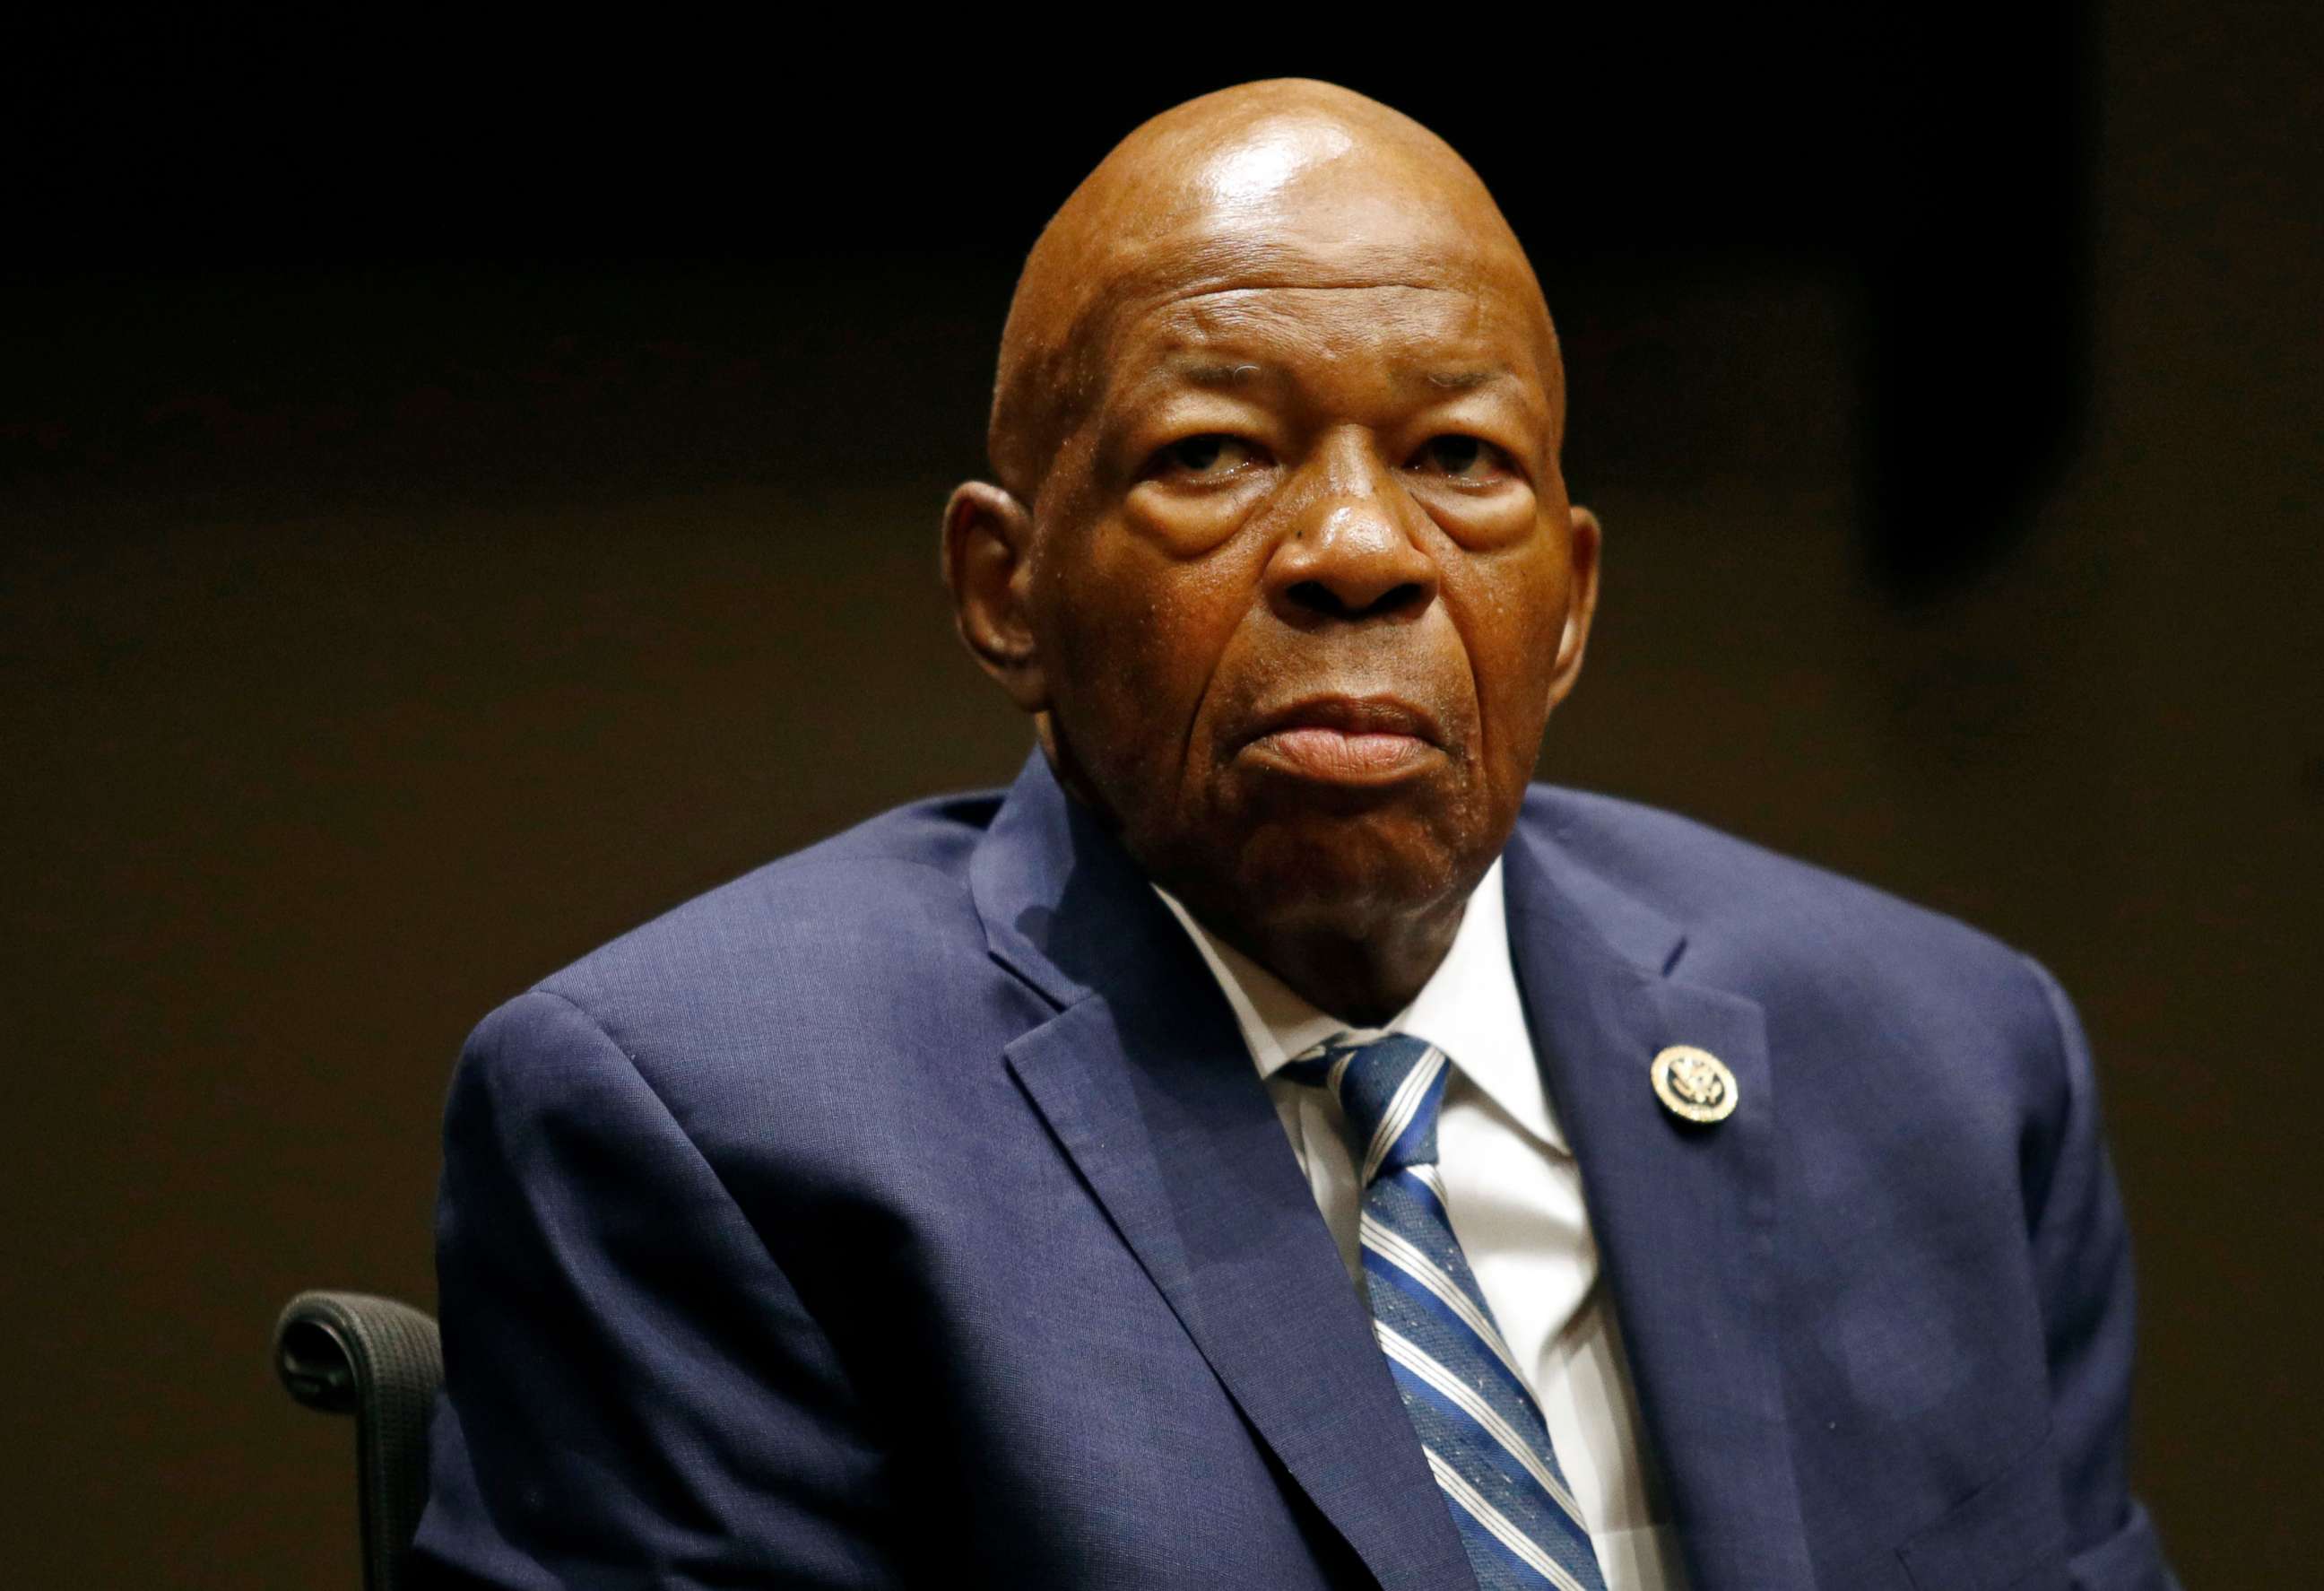 PHOTO: Rep. Elijah Cummings participates in a panel discussion during a summit on the country's opioid epidemic at the Johns Hopkins Bloomberg School of Public Health in Baltimore, MD, Oct. 30, 2017.